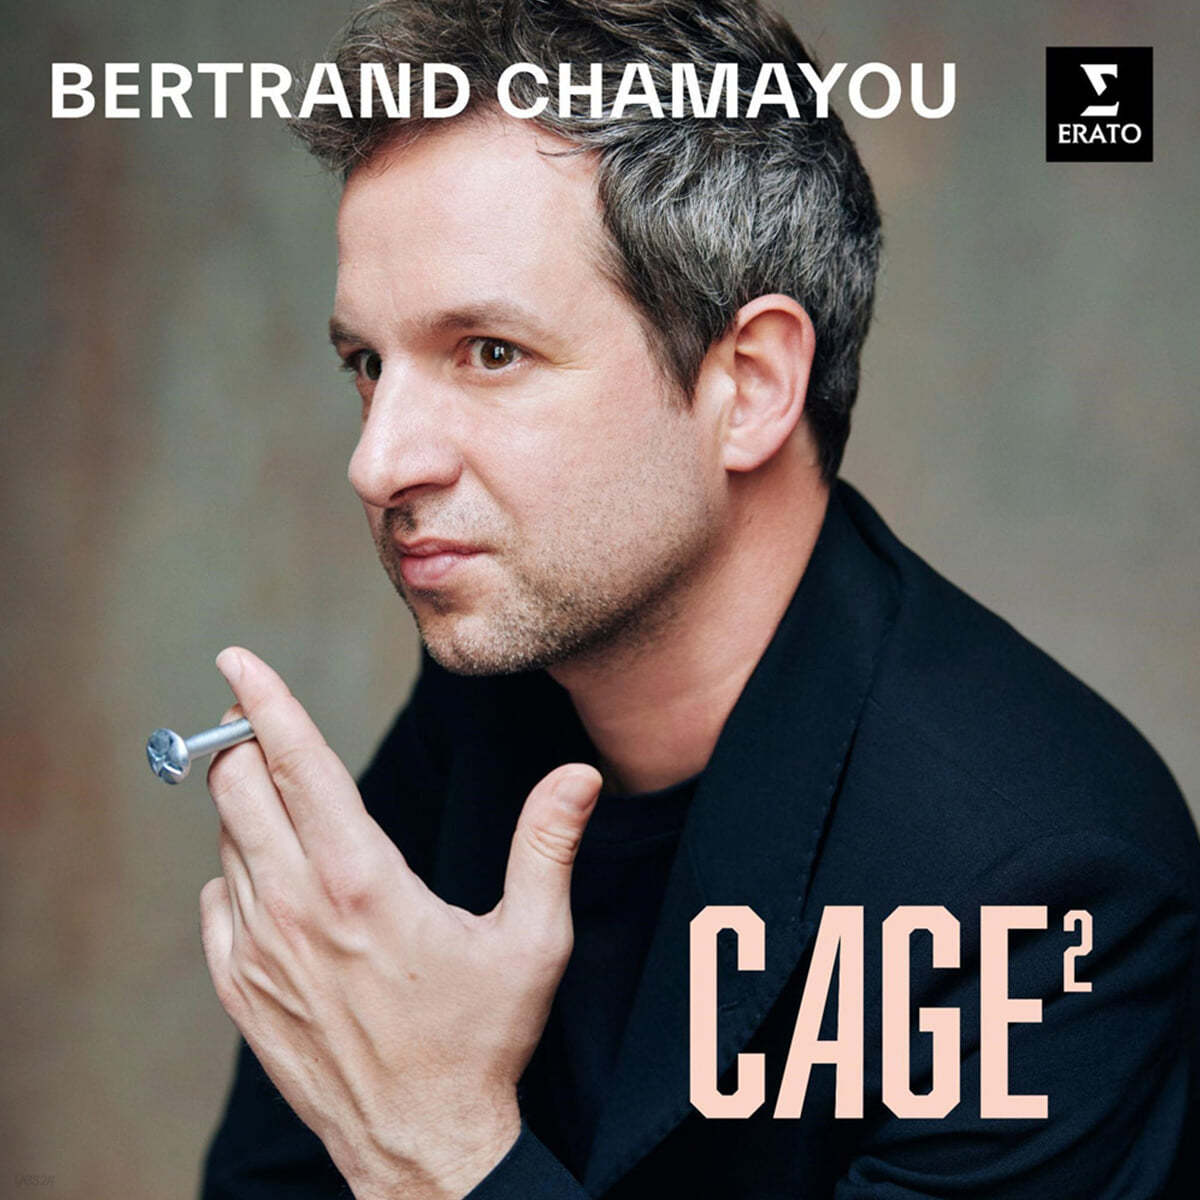 Bertrand Chamayou 존 케이지 2 (Cage&#178;) [LP]